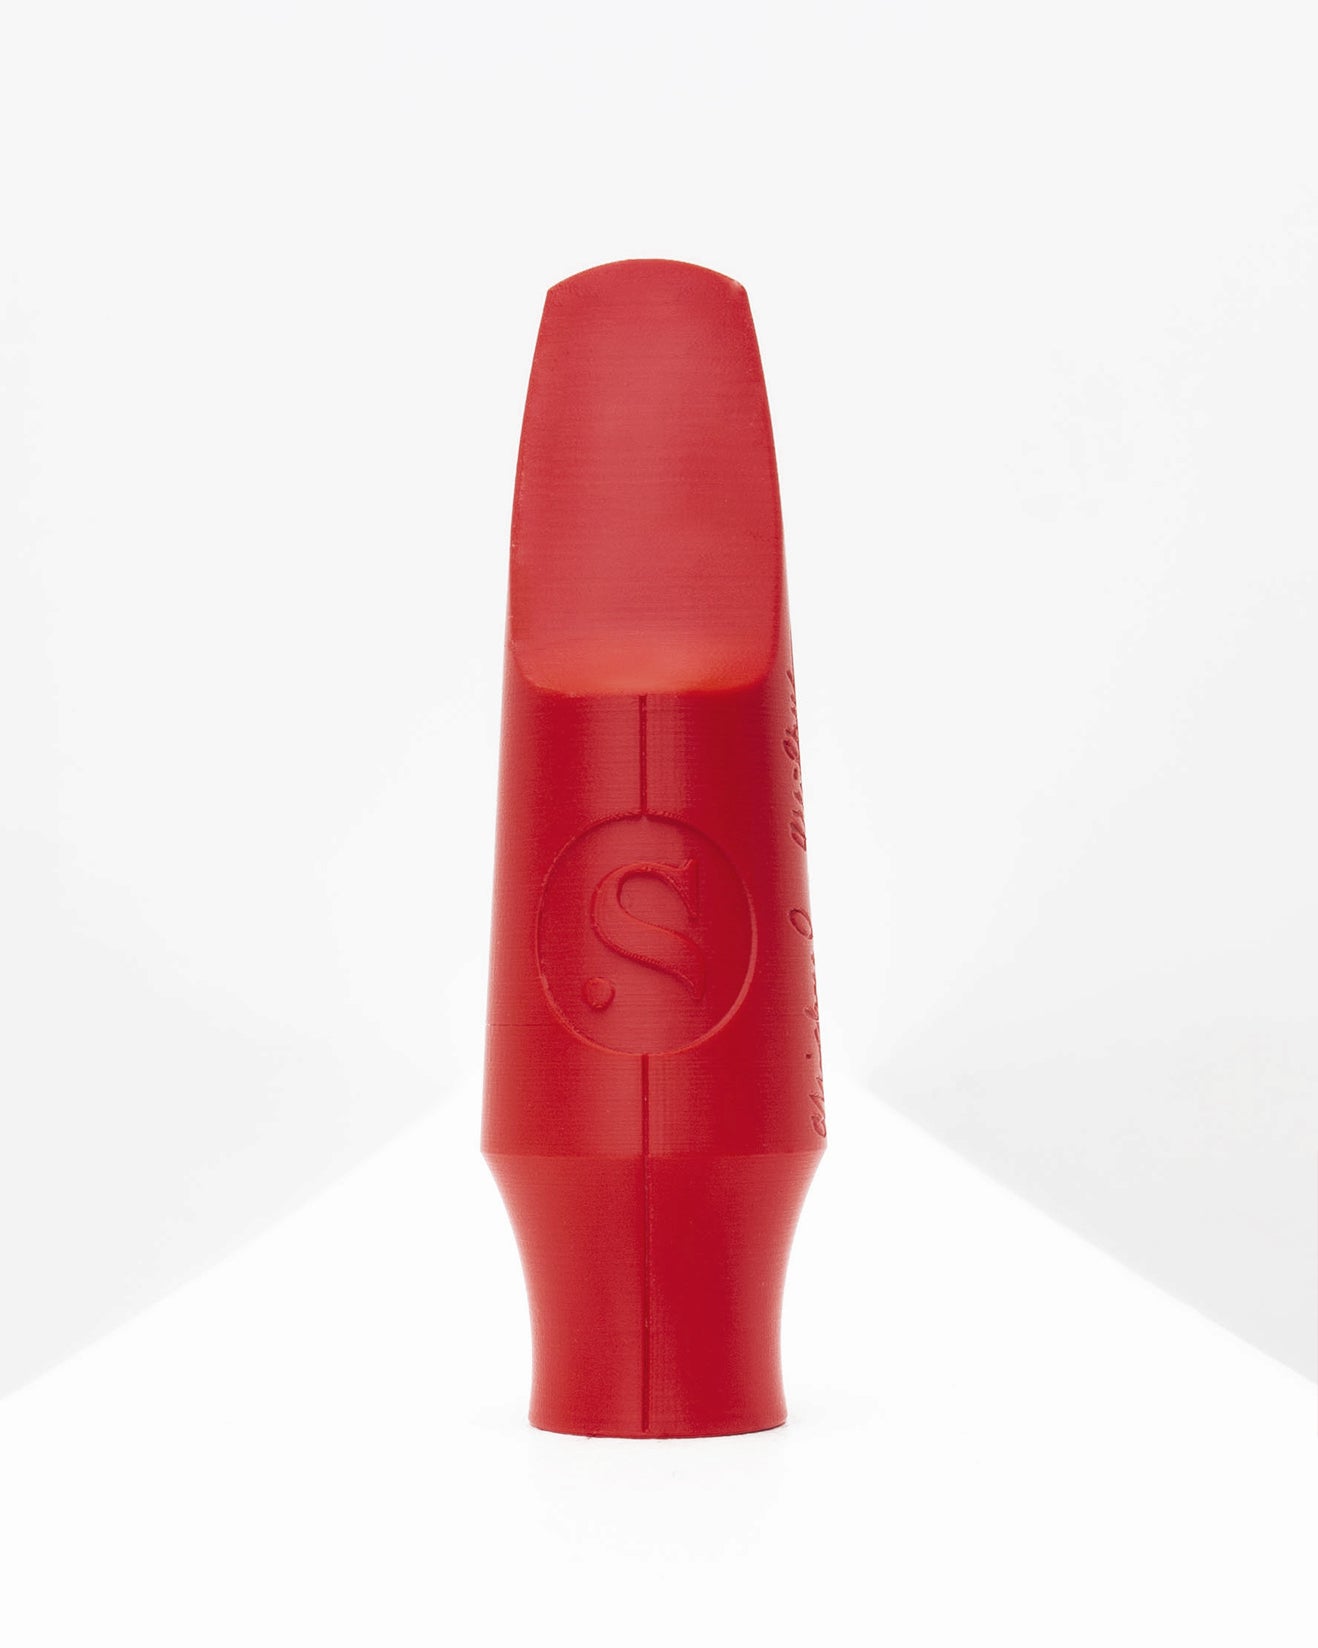 Tenor Signature Saxophone mouthpiece - Daro Behroozi by Syos - 11 / Carmine Red